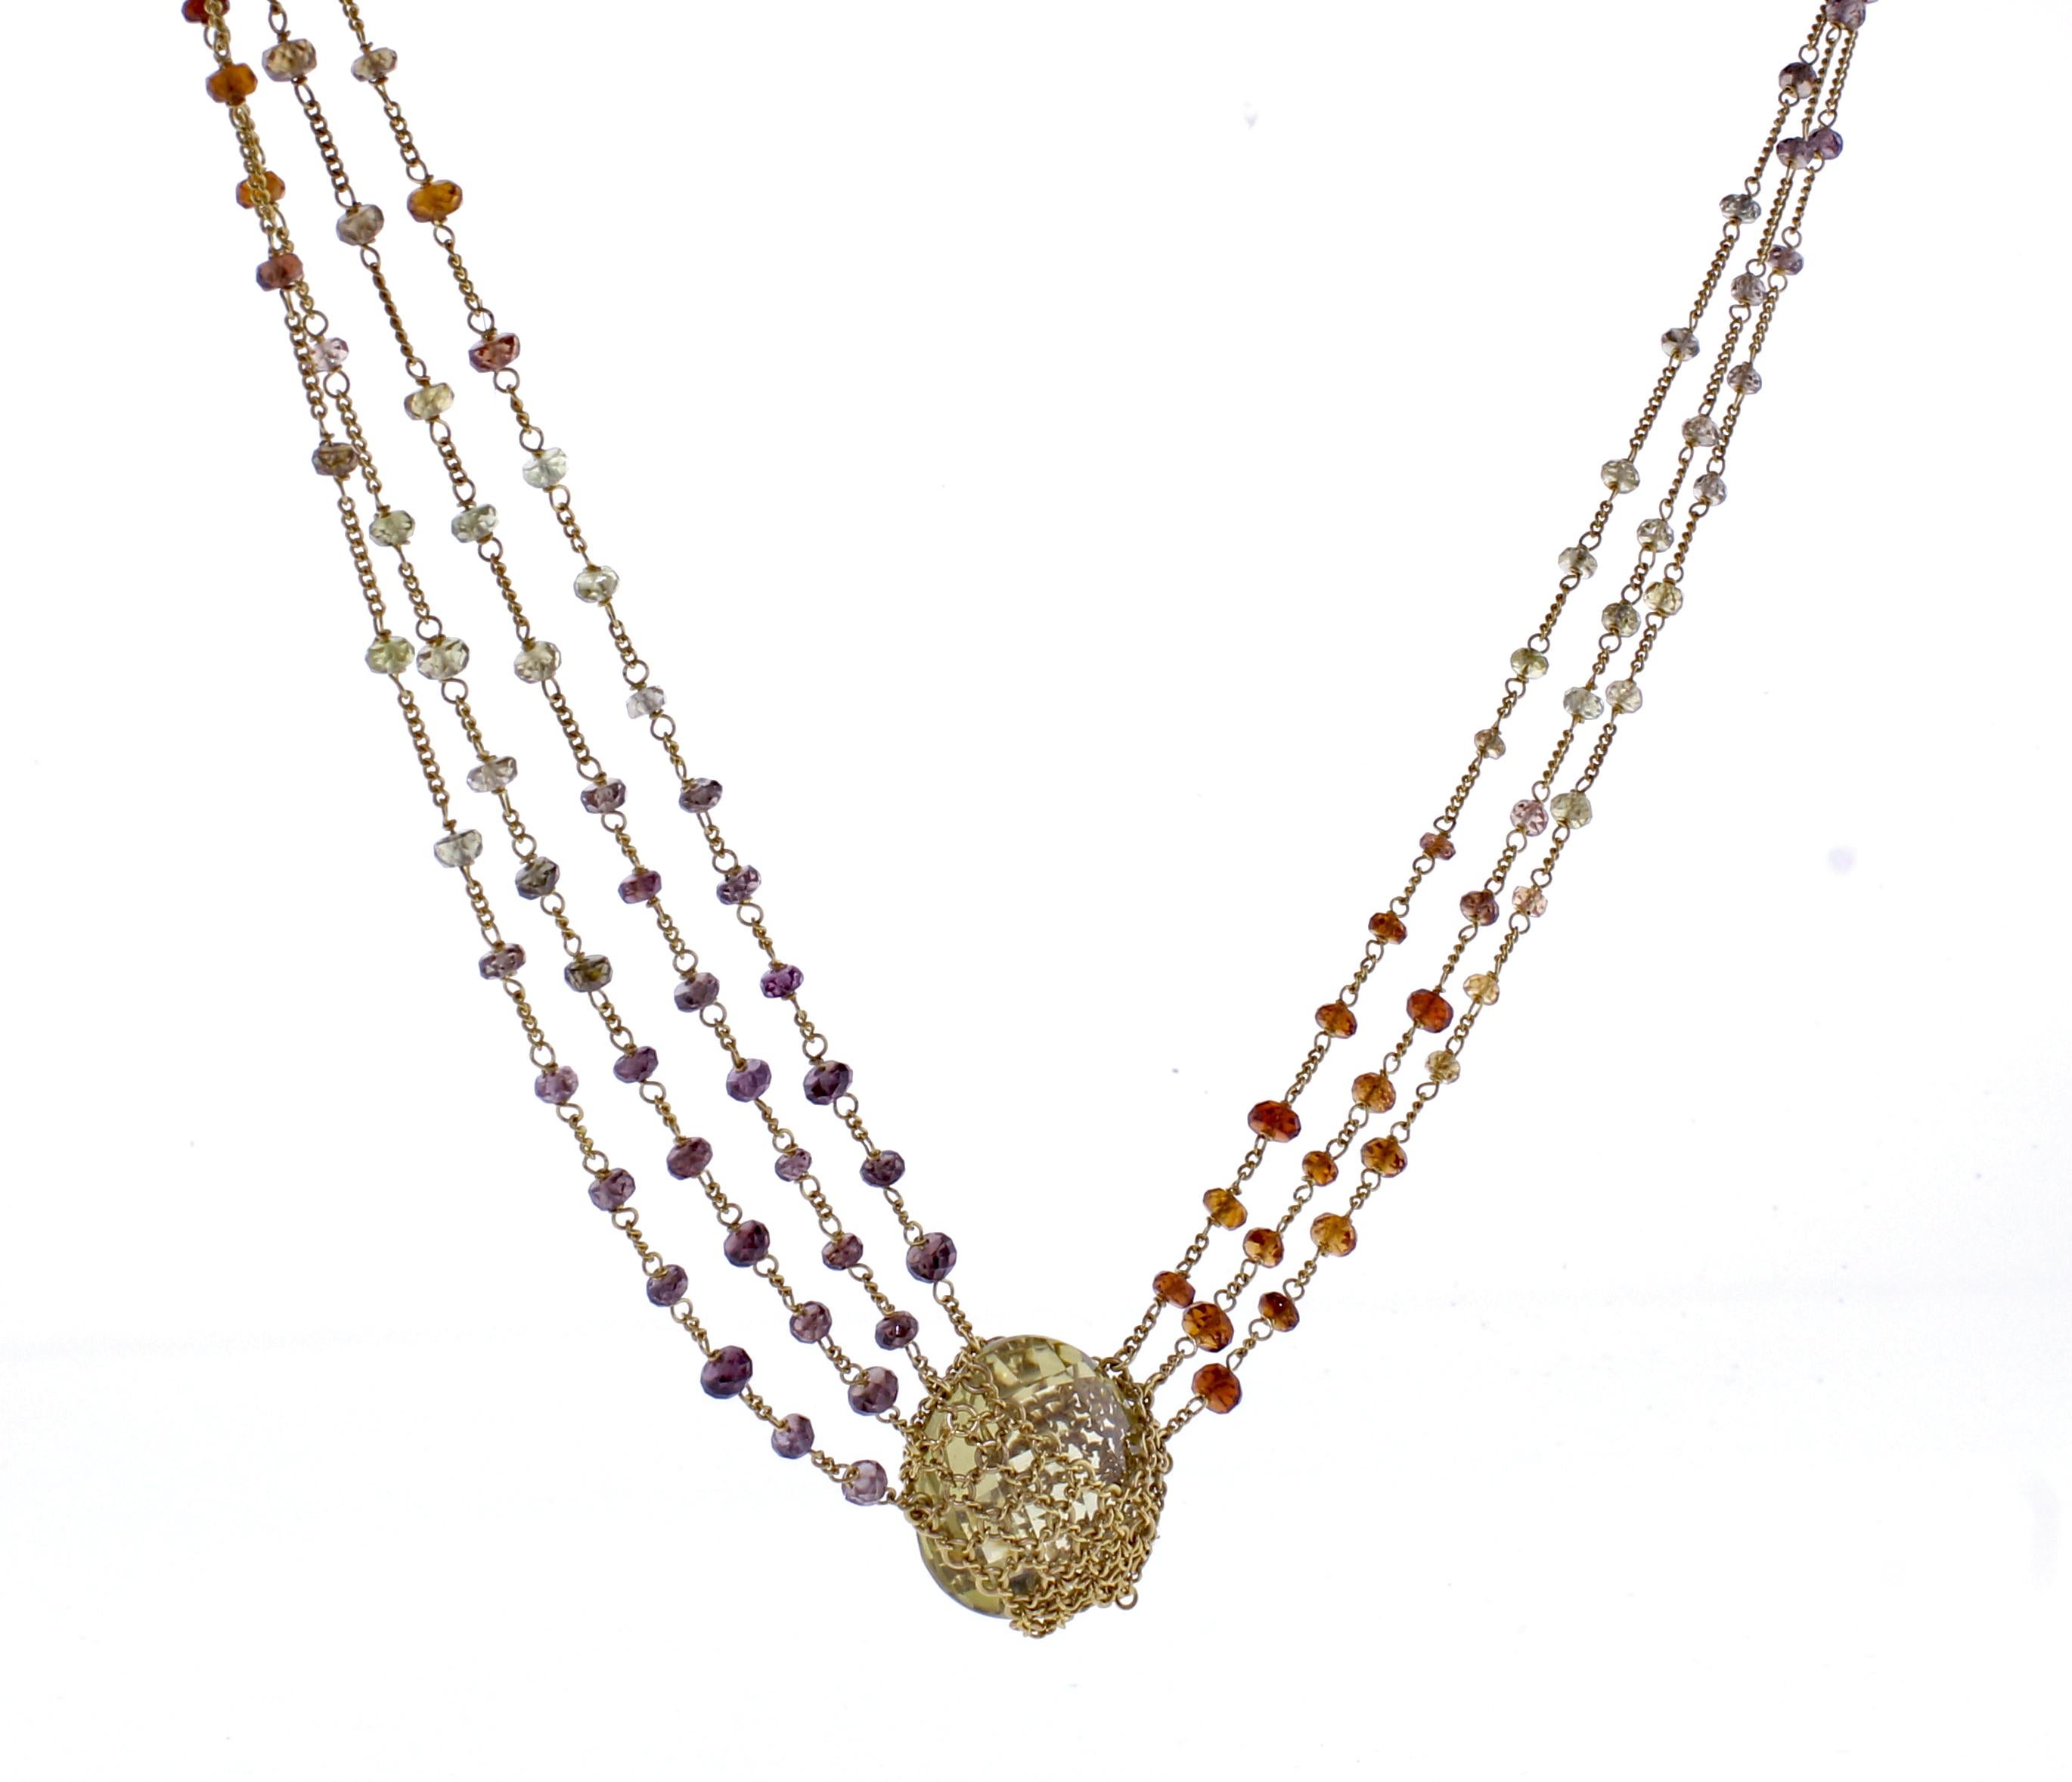 From World-famous jewelry designers Anthony Camargo and Nak Armstrong,  a handmade  lemon citrine and amethyst necklace.  The 18 karat necklace contains a center pear-shape briolette  lemon citrine. The  7 chains are highlighted by citrine, lemon